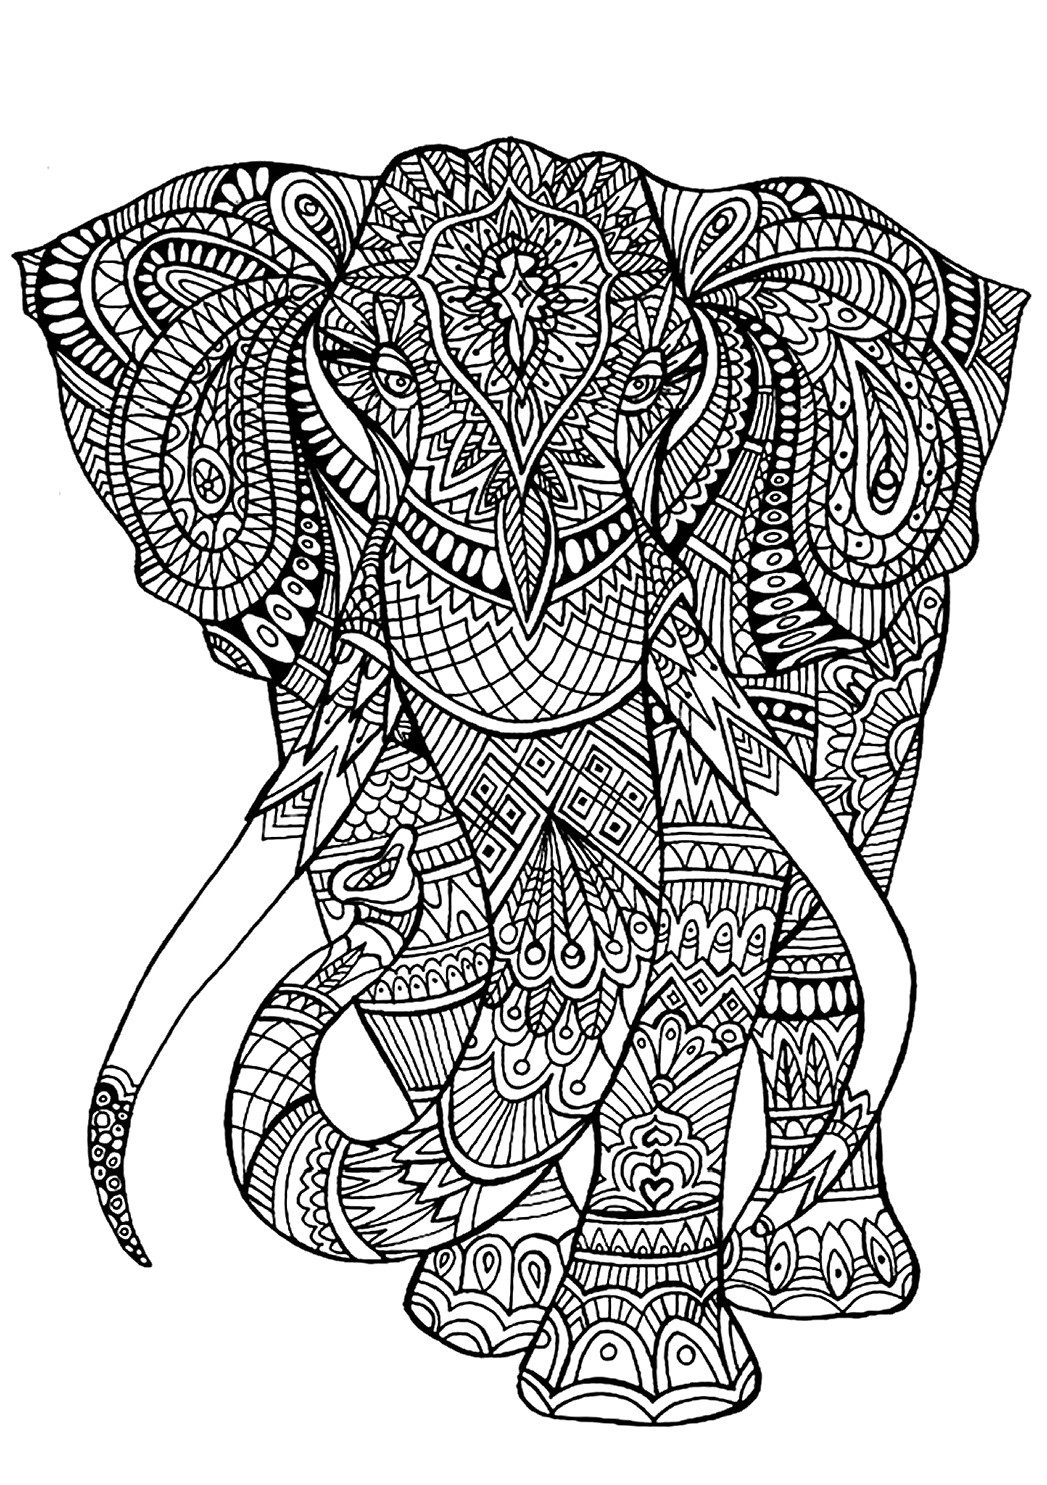 Free Printable Coloring Pages Adult
 like this one intended for adults to color can